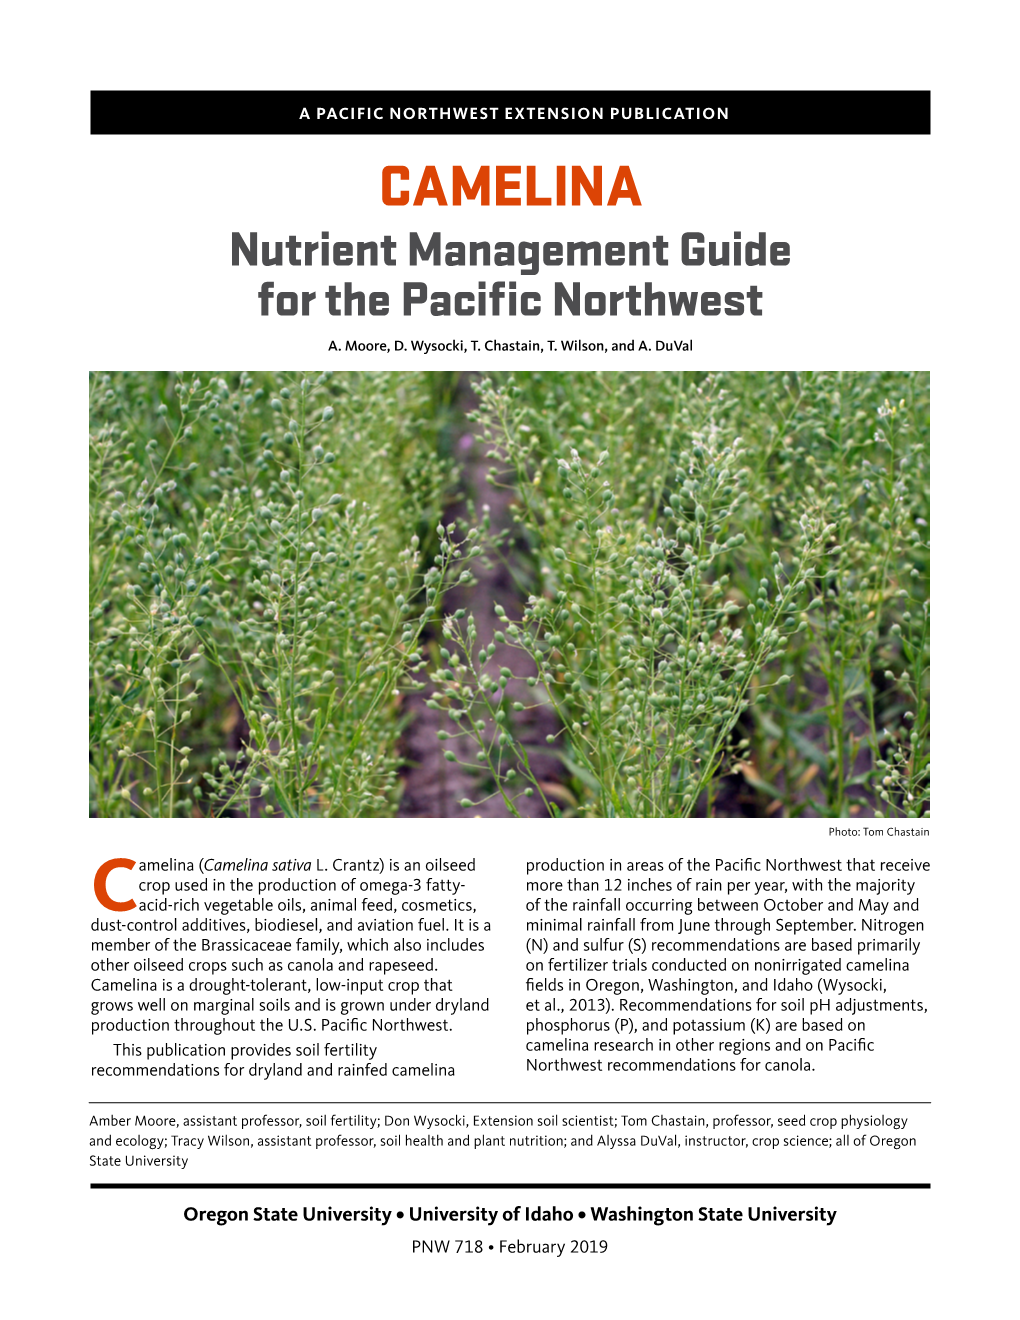 CAMELINA Nutrient Management Guide for the Pacific Northwest A